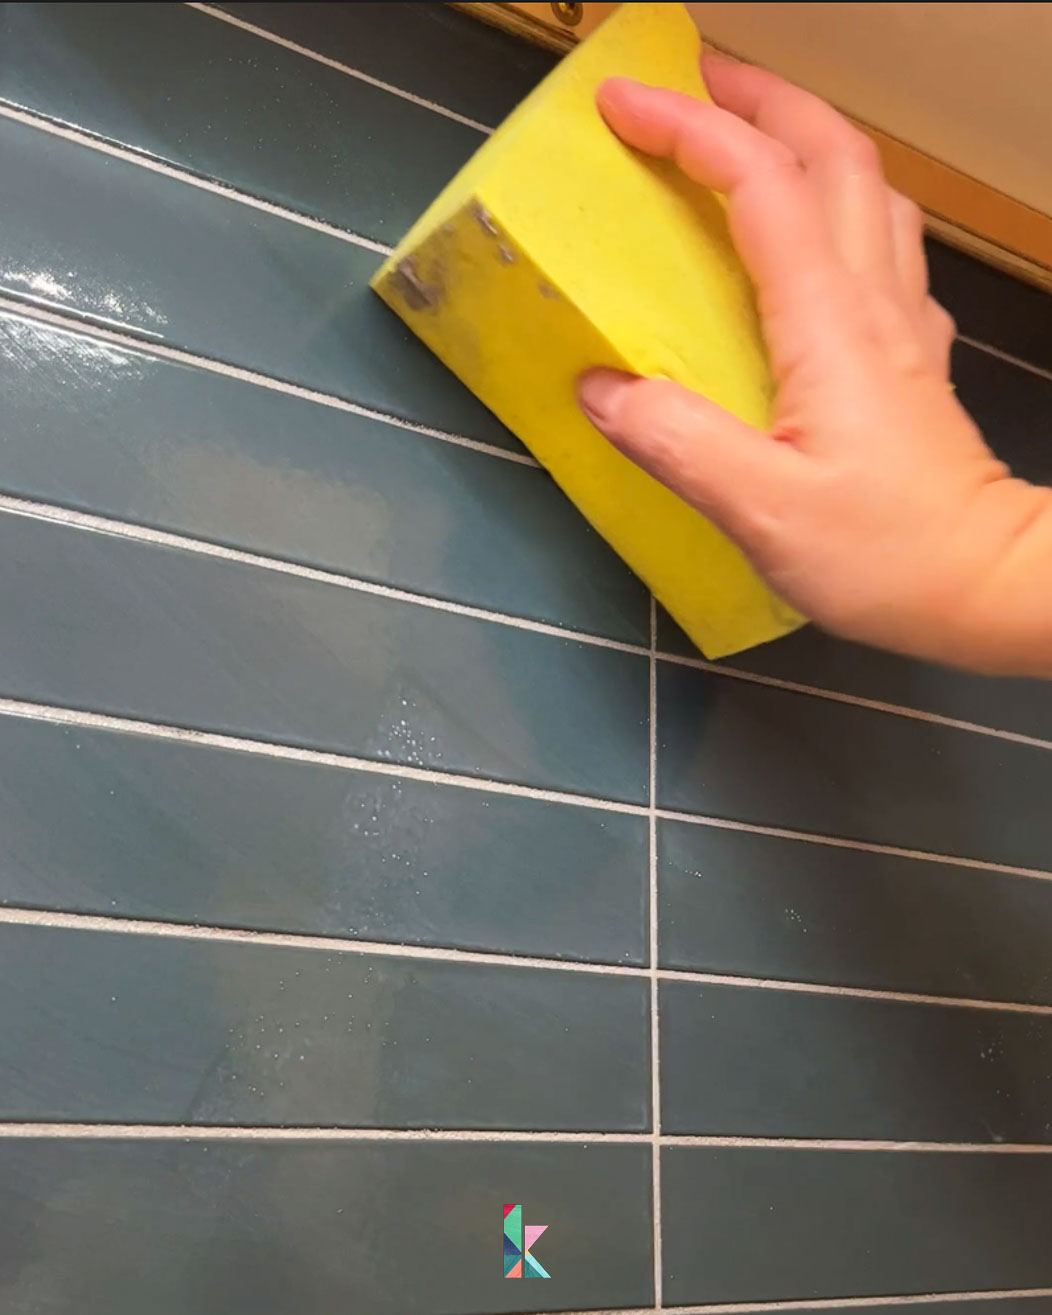 wiping excess grout off of backsplash tile